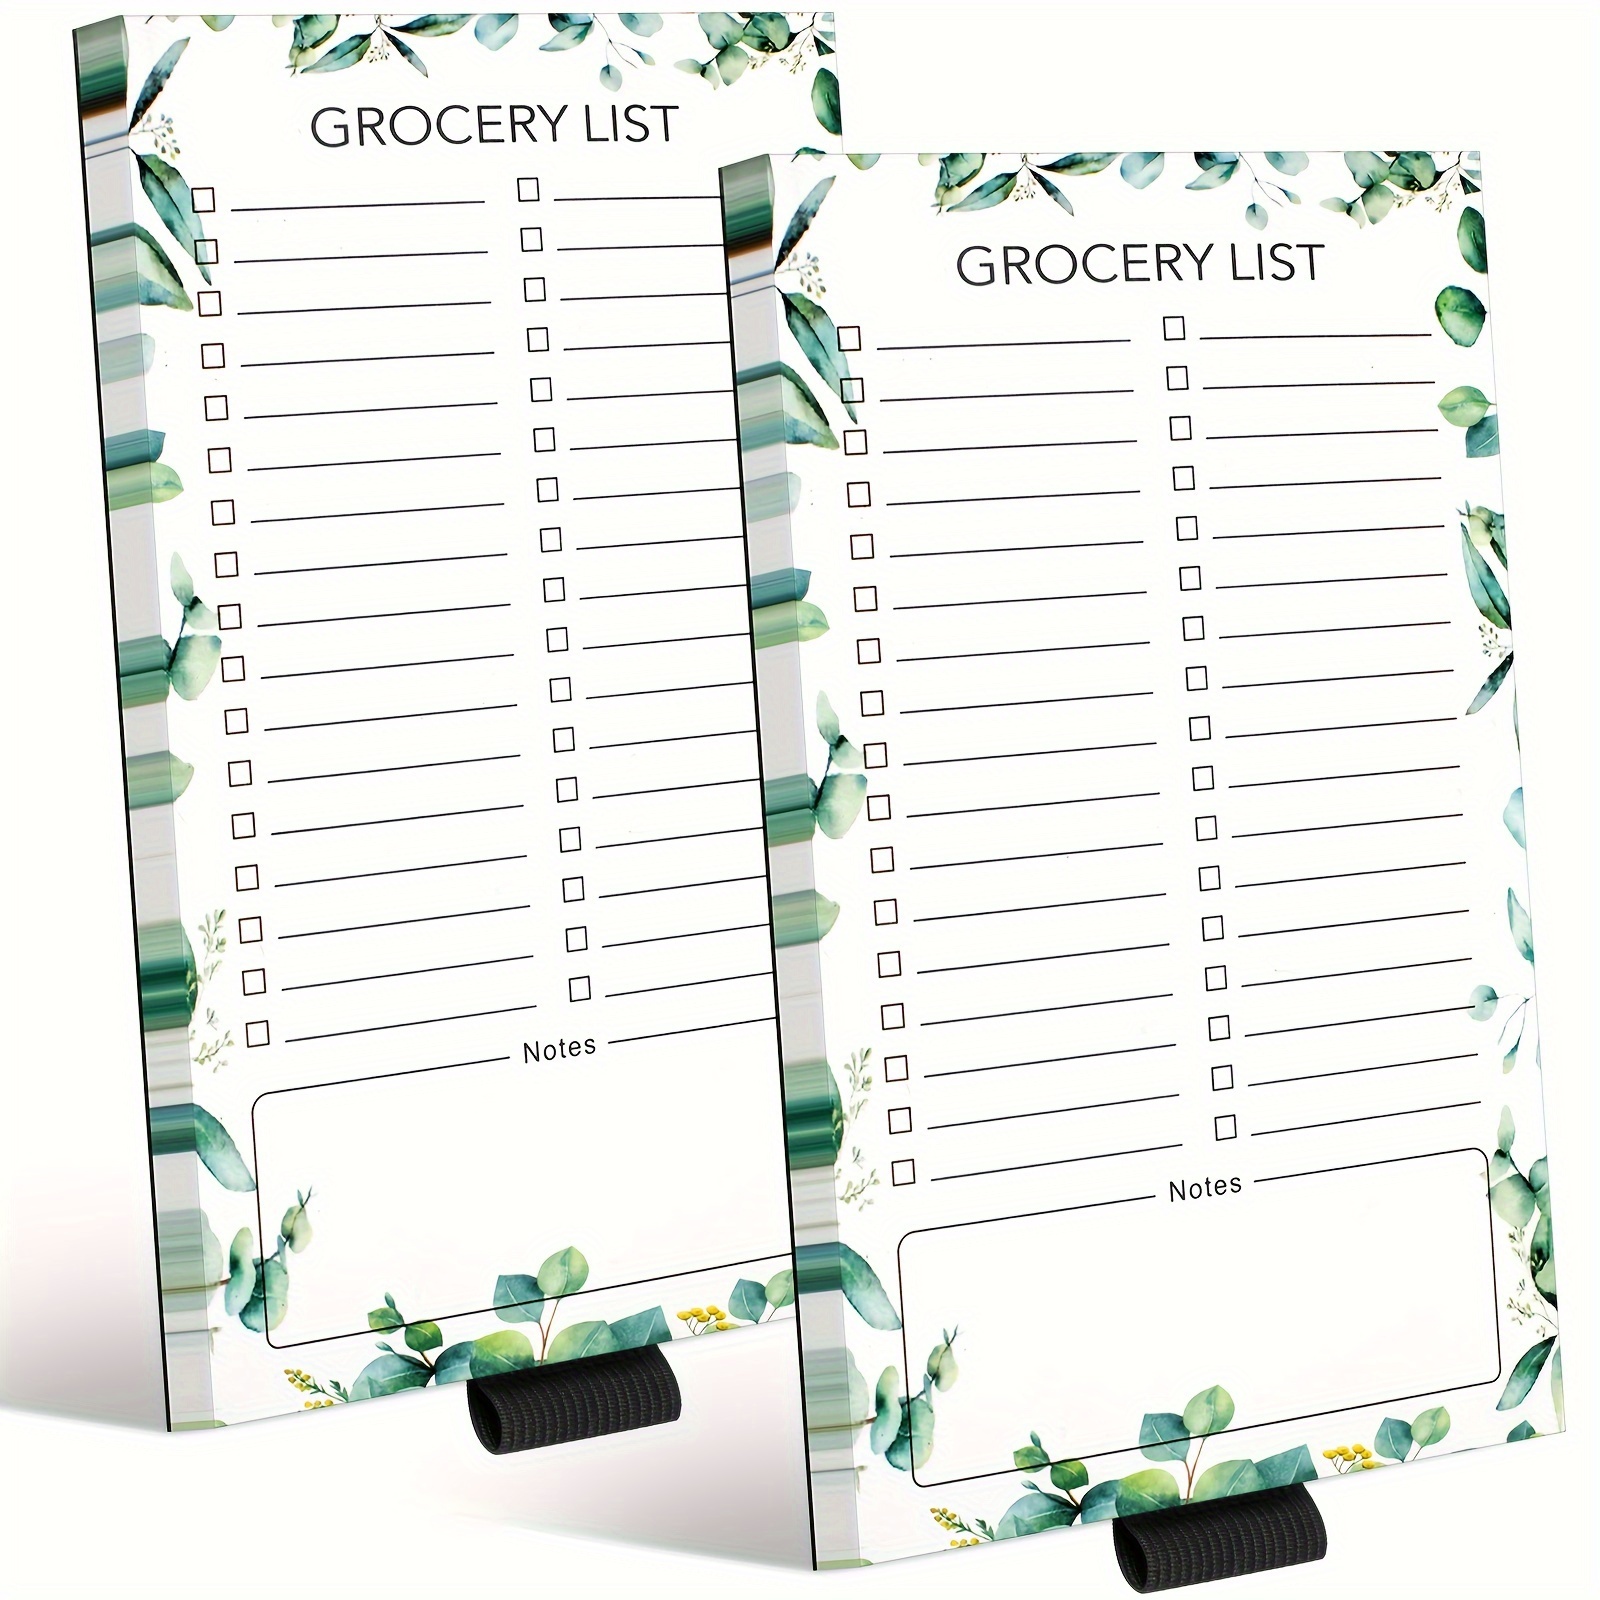 

2pcs Grocery List Magnet Pad For Fridge, 4.5x7.5 Inches Grocery List Pads, Magnetic Note Pad For Fridge, Magnetic Grocery List Pad For Fridge, Shopping List, 60 Pages Per Magnetic Notepad